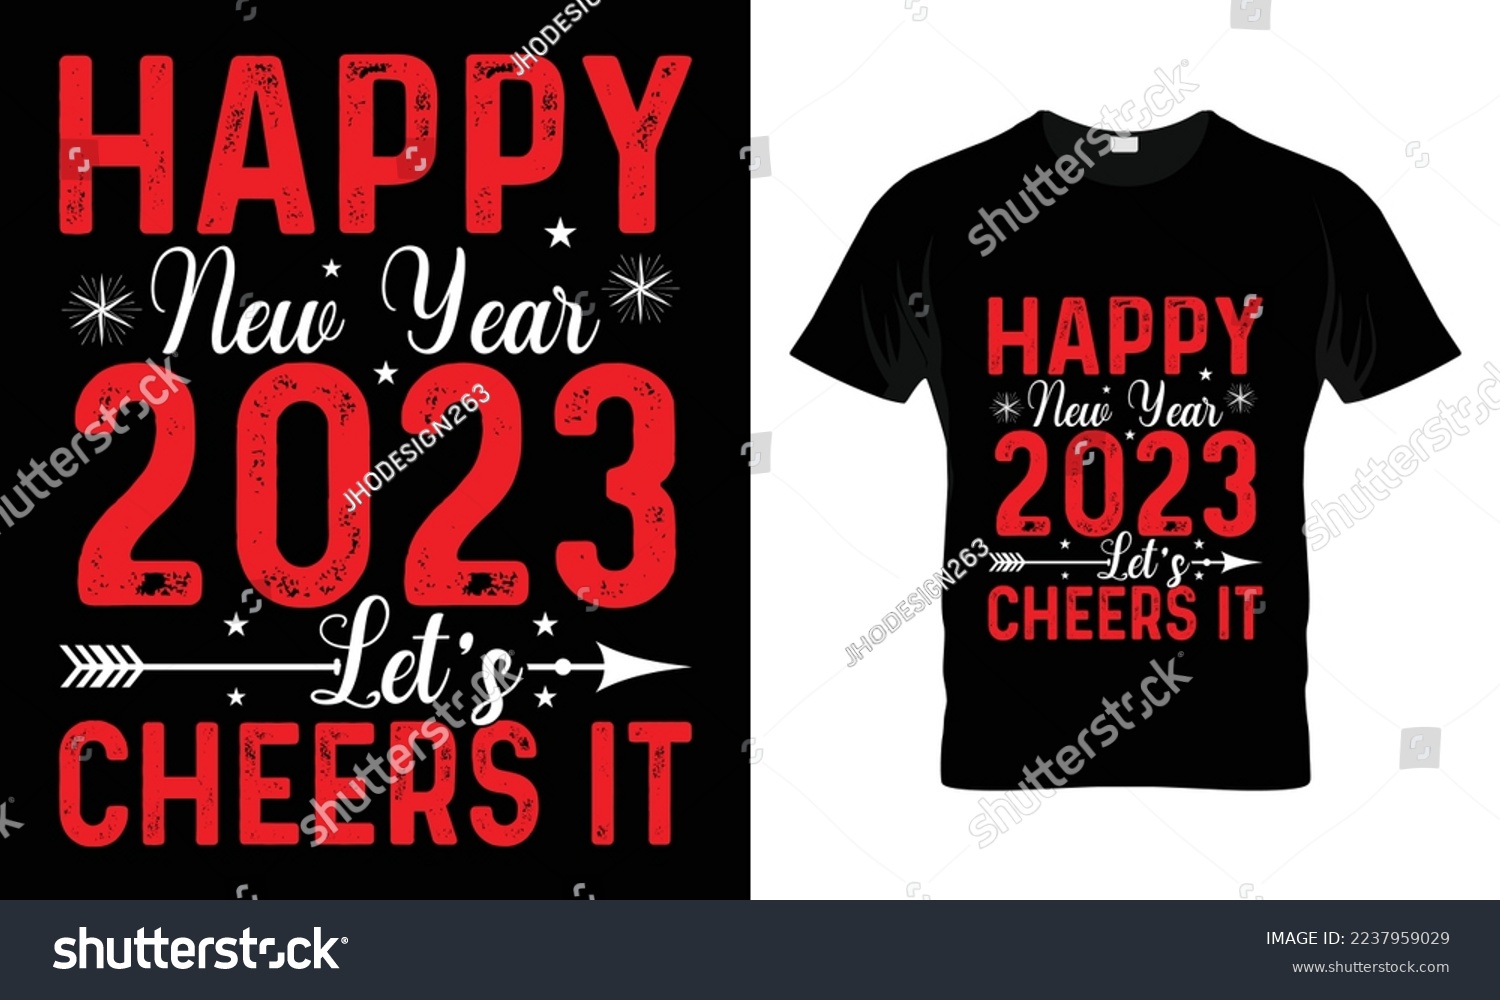 SVG of Happy new year 2023 lets cheers it design template vector and typography.
Ready for t-shirt, mug,gift and other printing,2023 svg design,New Year Stickers quotes t shirt designs
Happy new year svg. svg